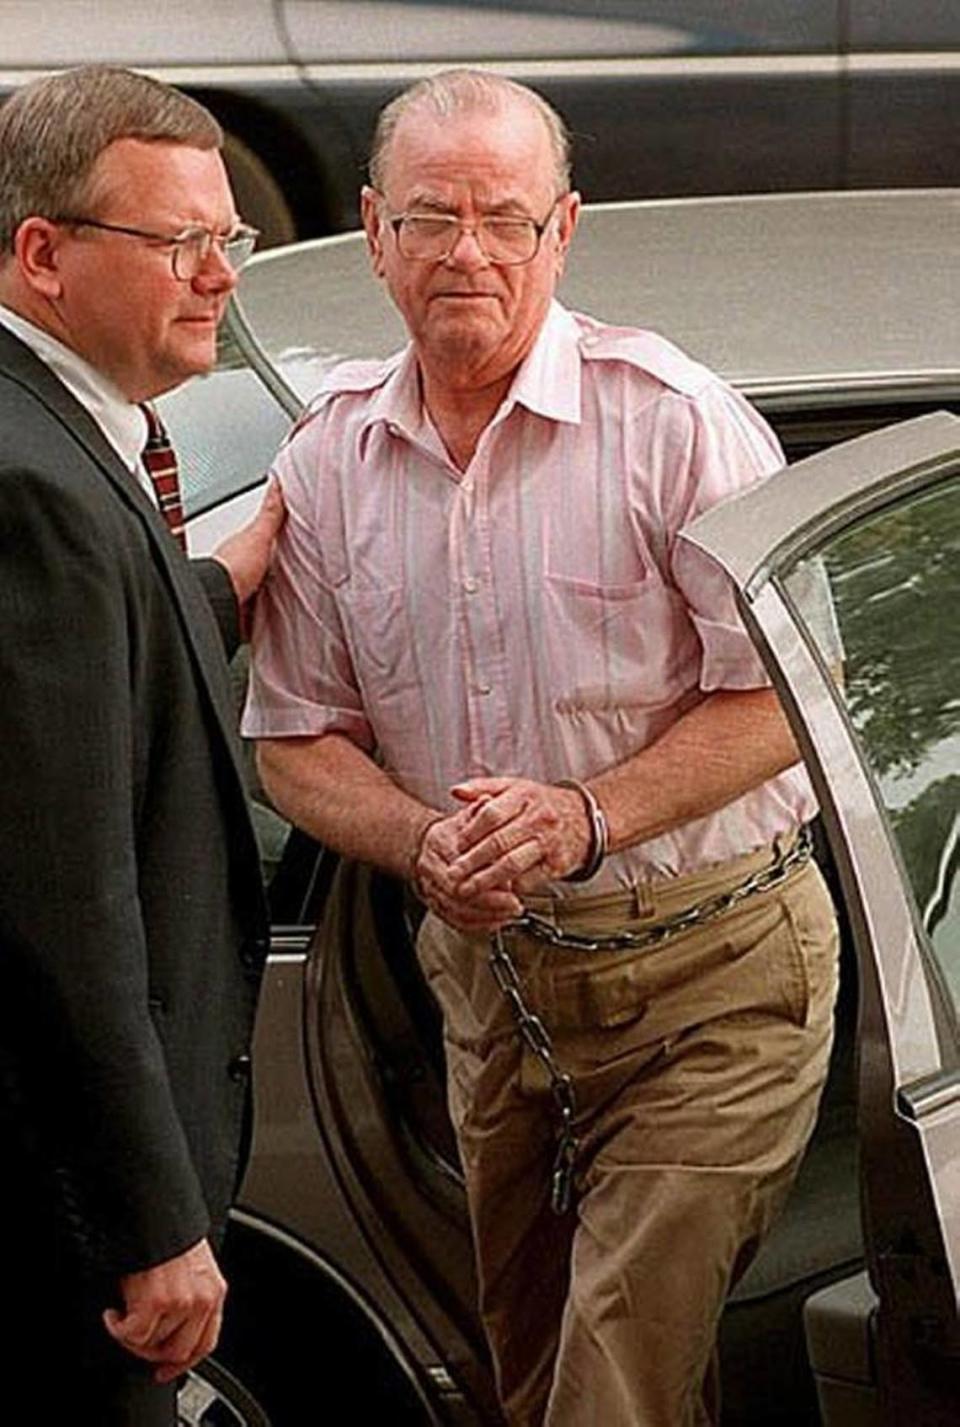 Mike Gillich Jr. arrives in September 1997 at federal courthouse in Hattiesburg, where federal prosecutors asked a judge to release him from prison for testifying against co-conspirators about the plot to murder Vincent and Margaret Sherry. U.S. District Judge Charles Pickering refused to release Gillich immediately, but did shave time off his sentence.